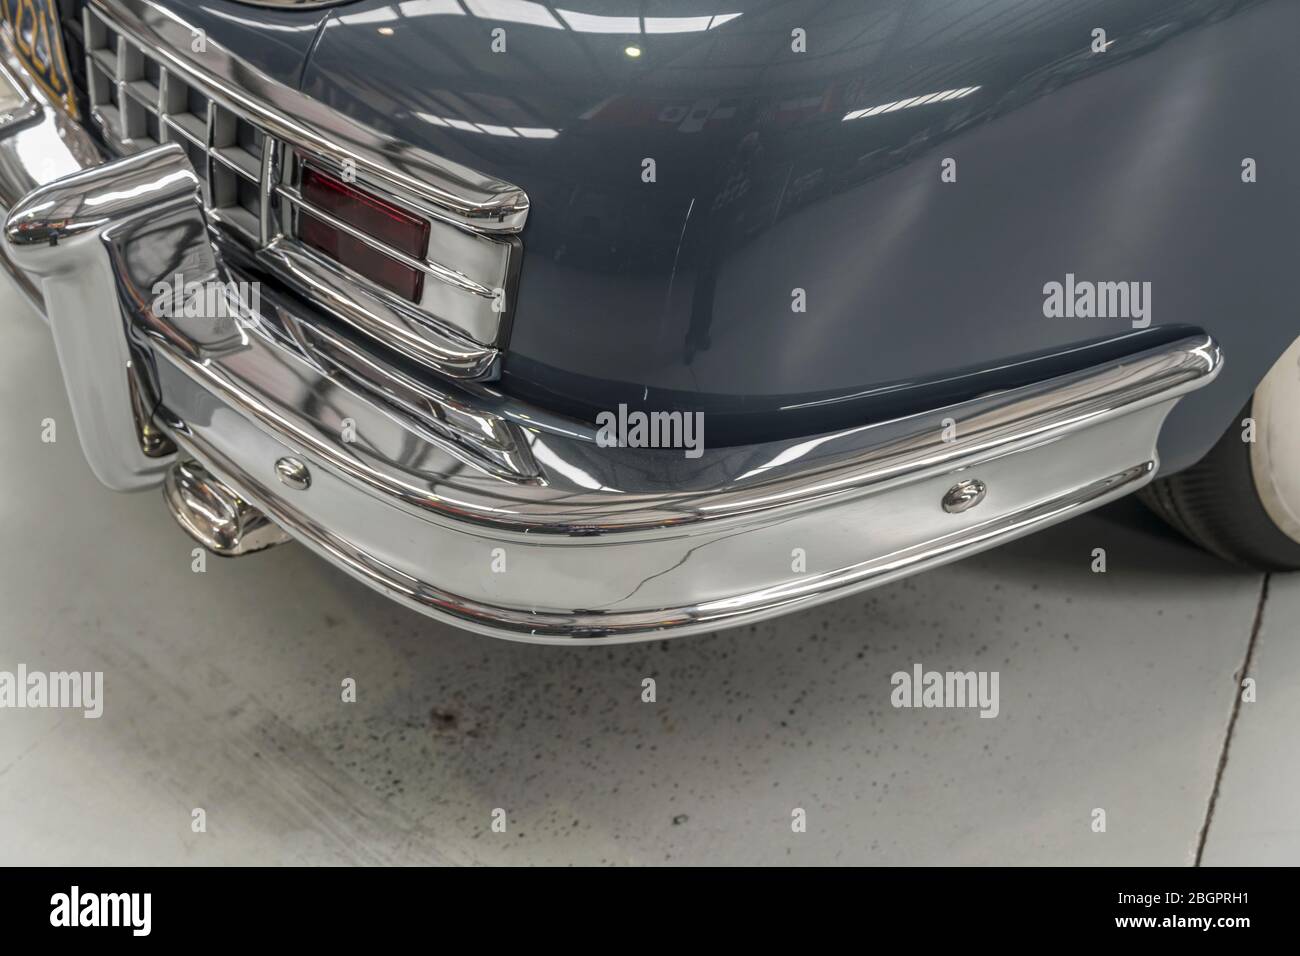 detail of chrome plated rear bumper and light of vintage car. shot at Wanaka, Otago, South Island, New Zealand Stock Photo